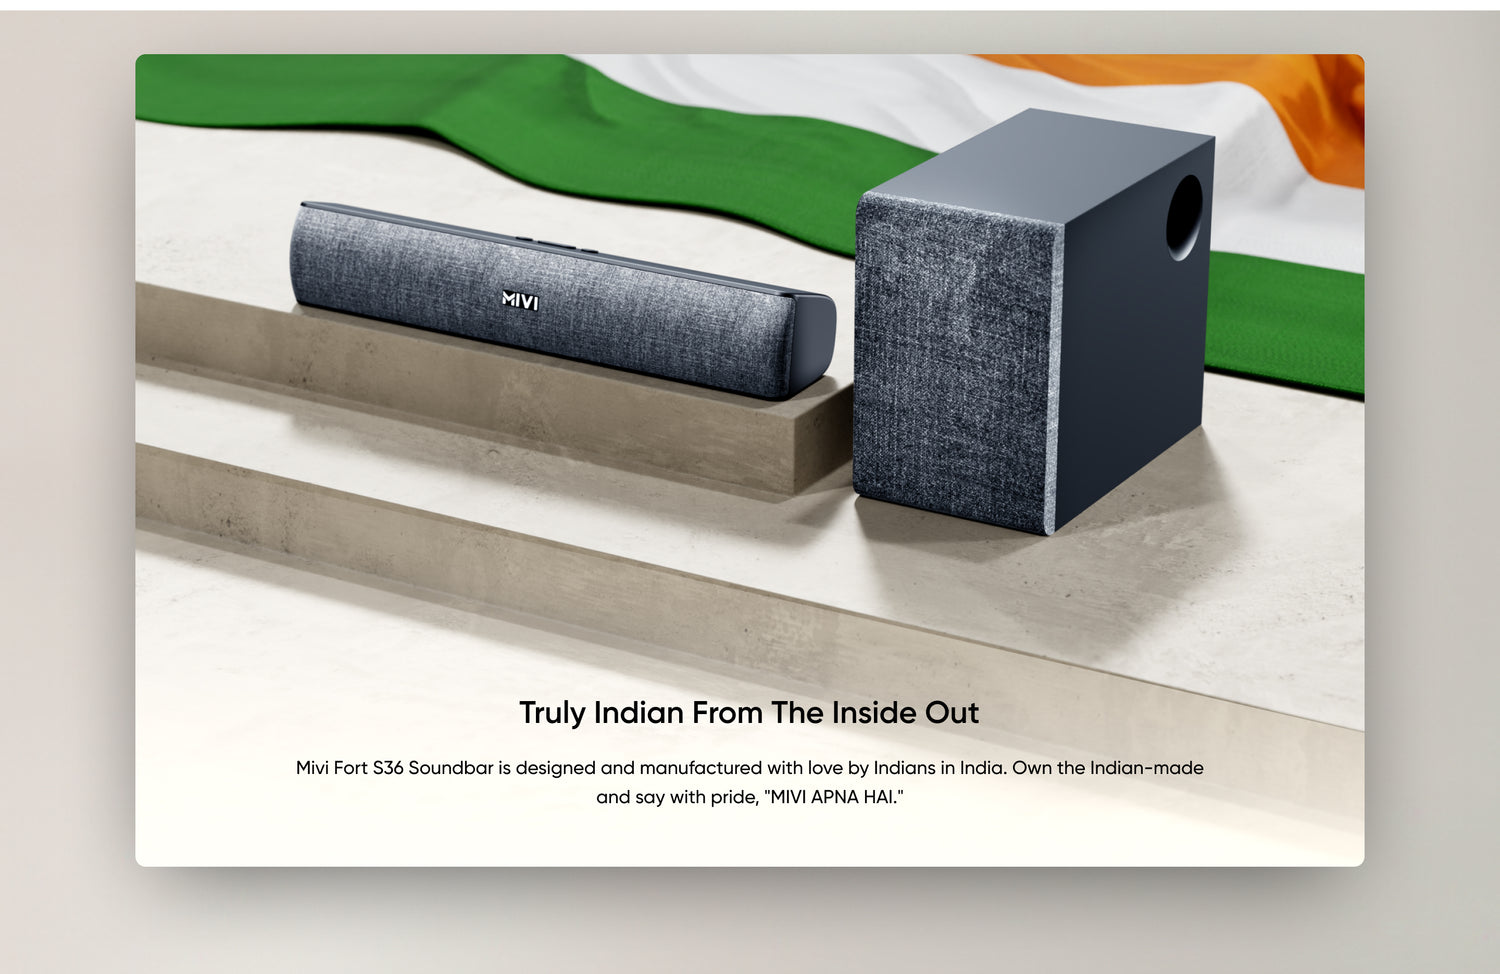 Truly Indian from The Inside Out

Mivi Fort S36 Soundbar is designed and manufactured with love by Indians in India. Own the Indian-made and say with pride, "MIVI APNA HAI."